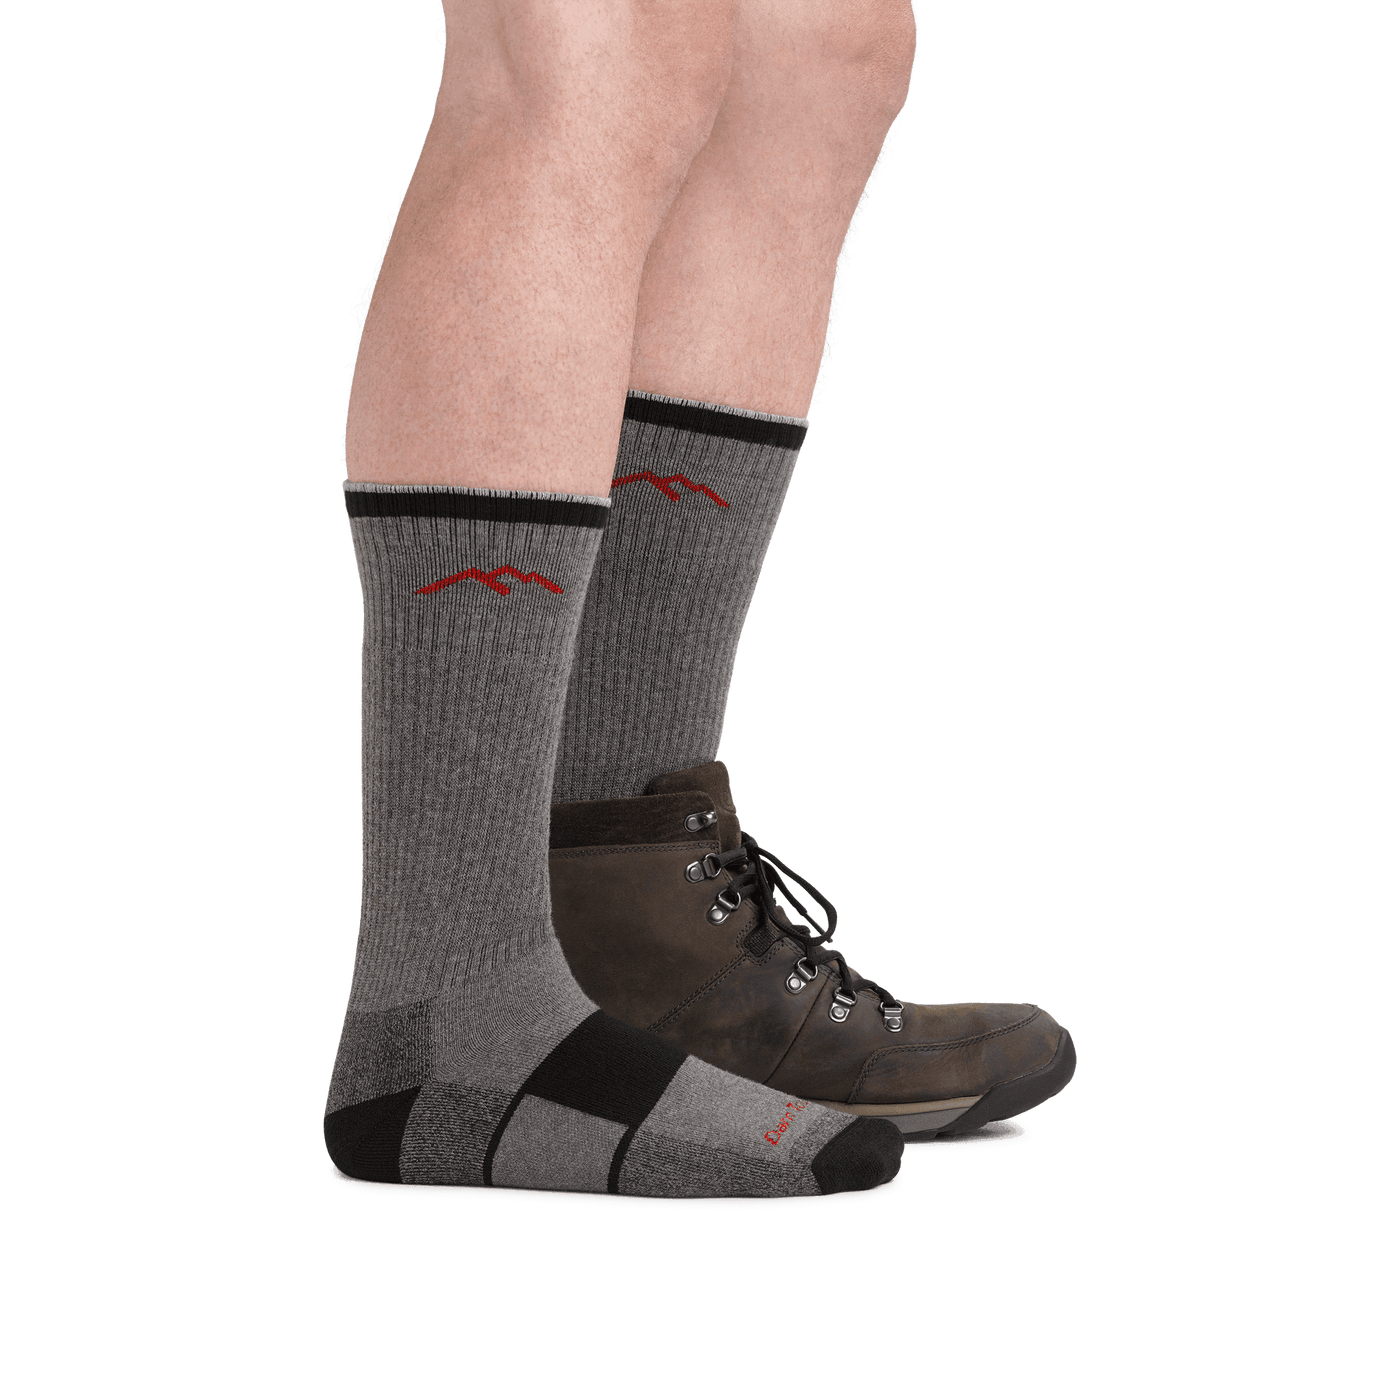 Coolmax® Hiker Boot, Men's Midweight with Cushion #1933 - Darn Tough - The Sock Monster